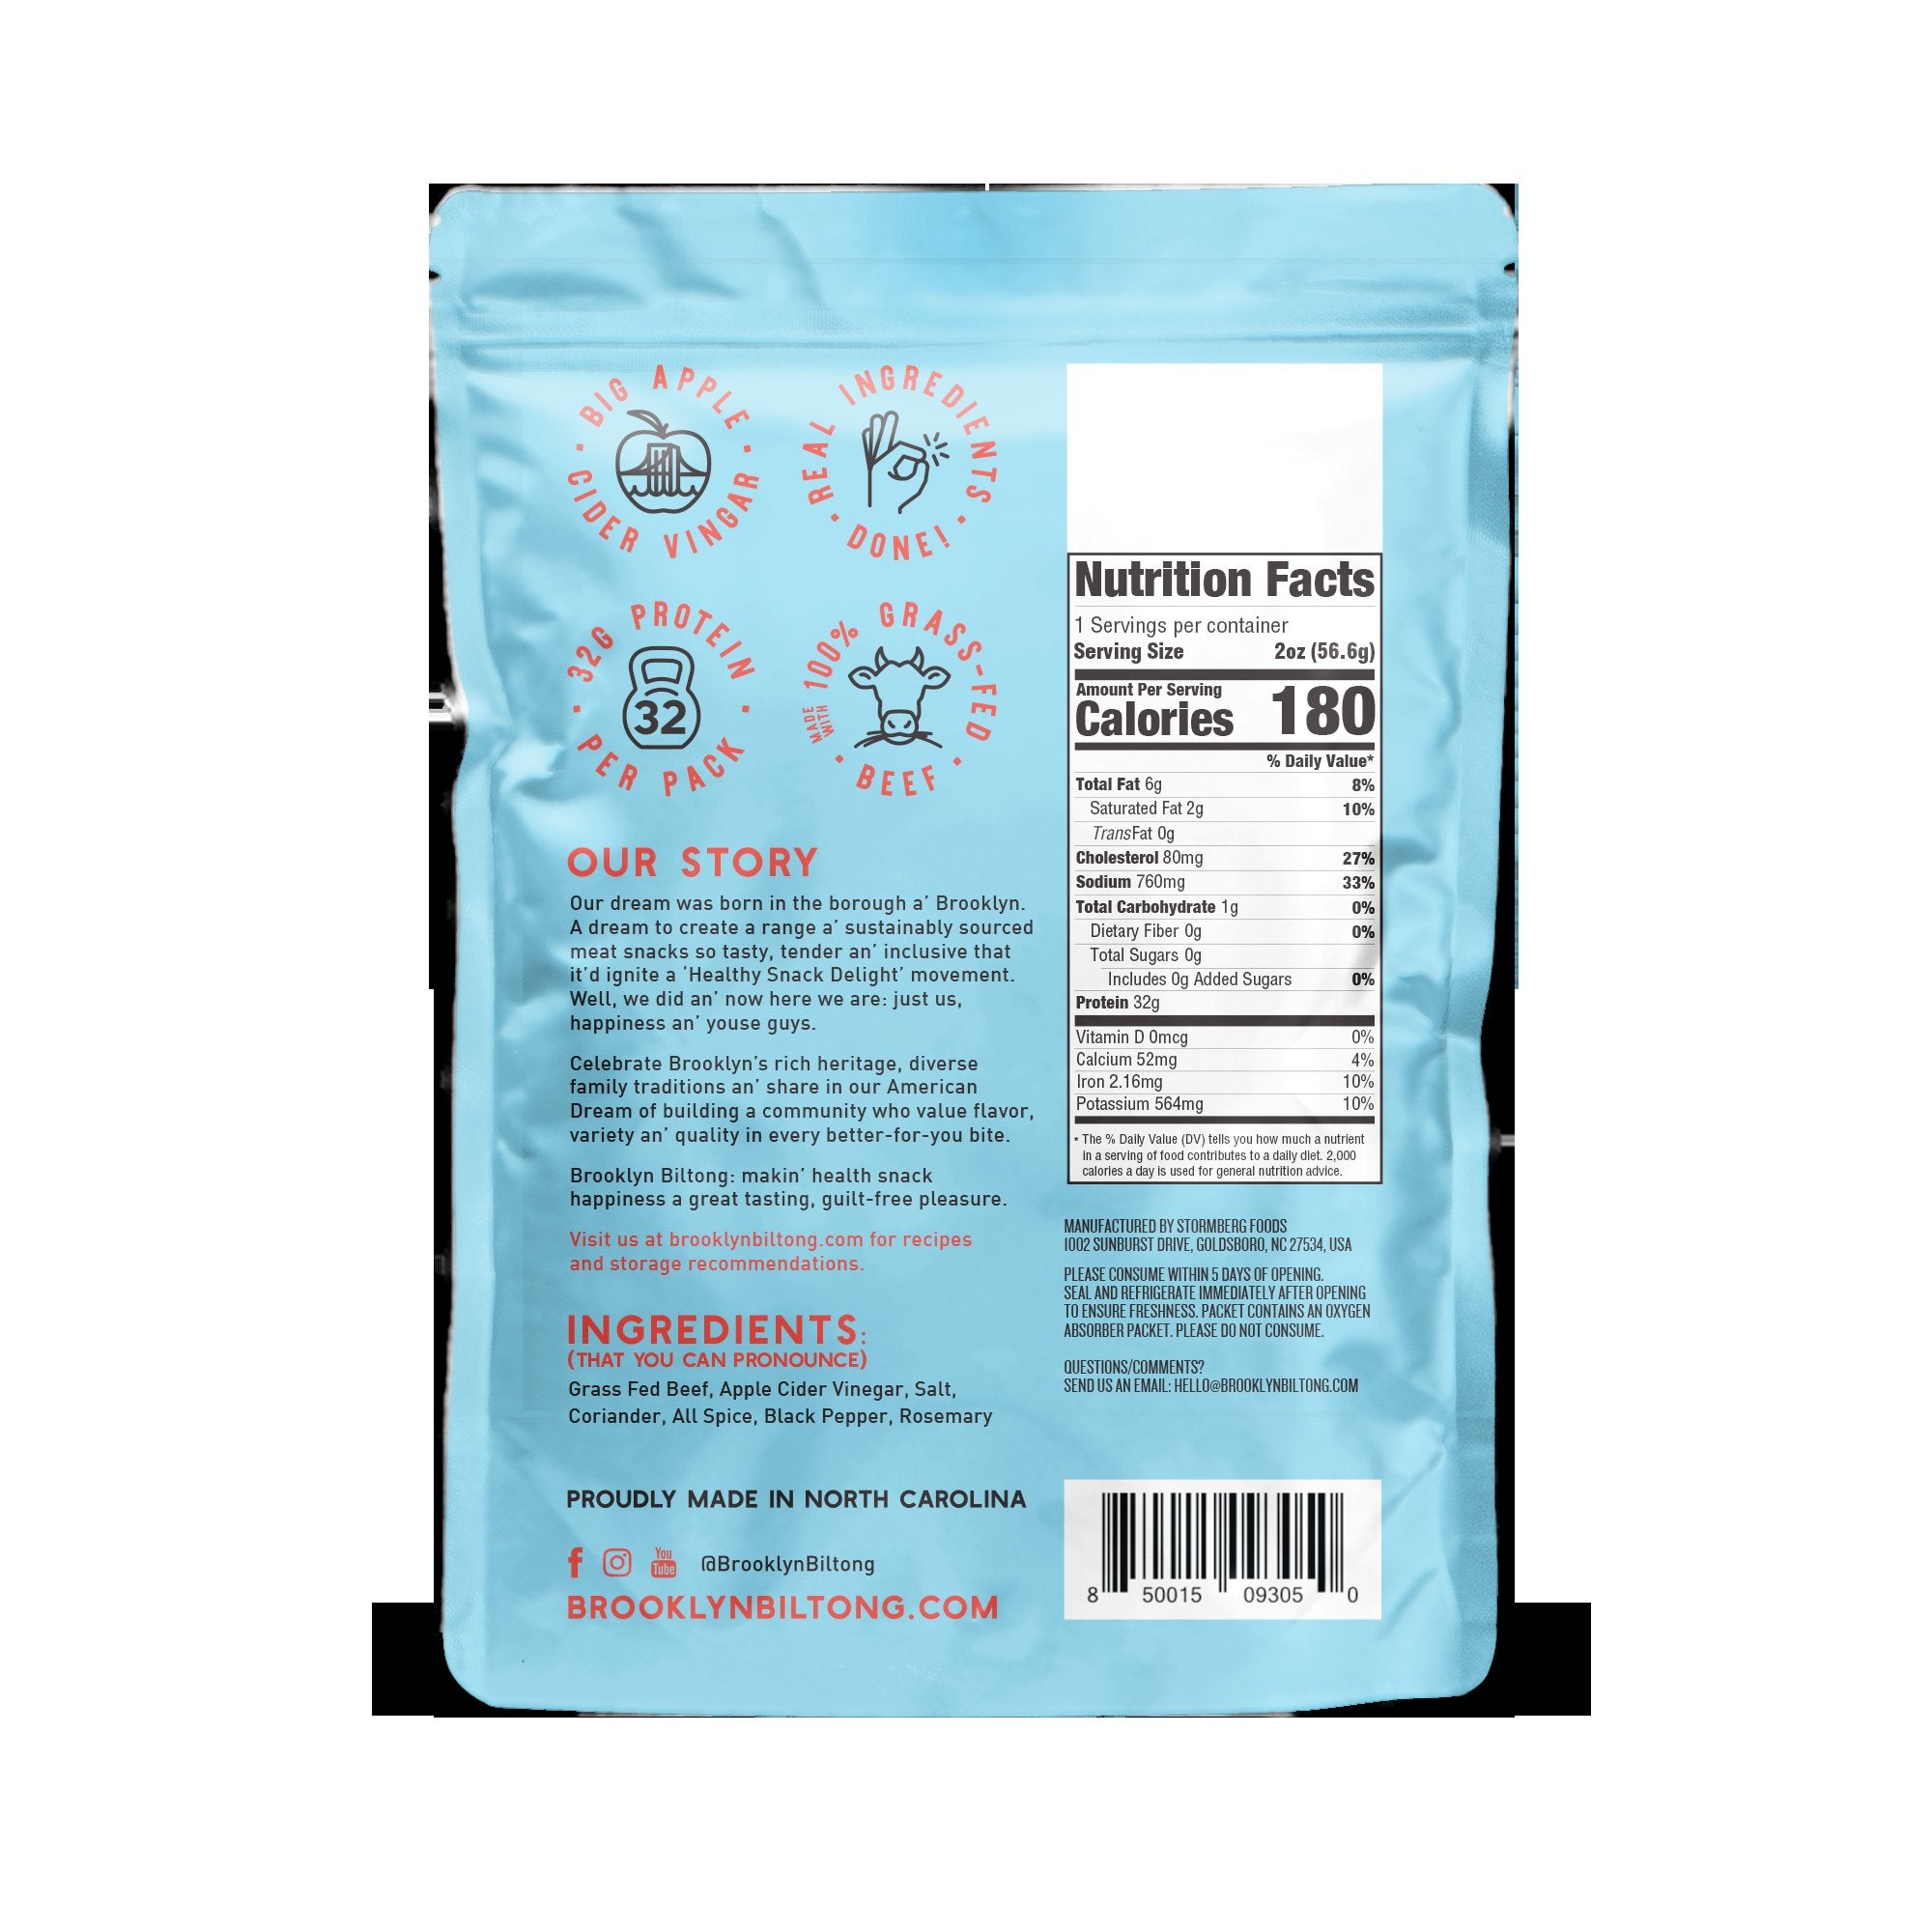  Brooklyn Biltong - Air Dried Grass Fed Beef Snack, South  African Beef Jerky - Whole30 Approved, Paleo, Keto, Gluten Free, Sugar  Free, Made in USA - 16 oz. Bag (Original) : Everything Else